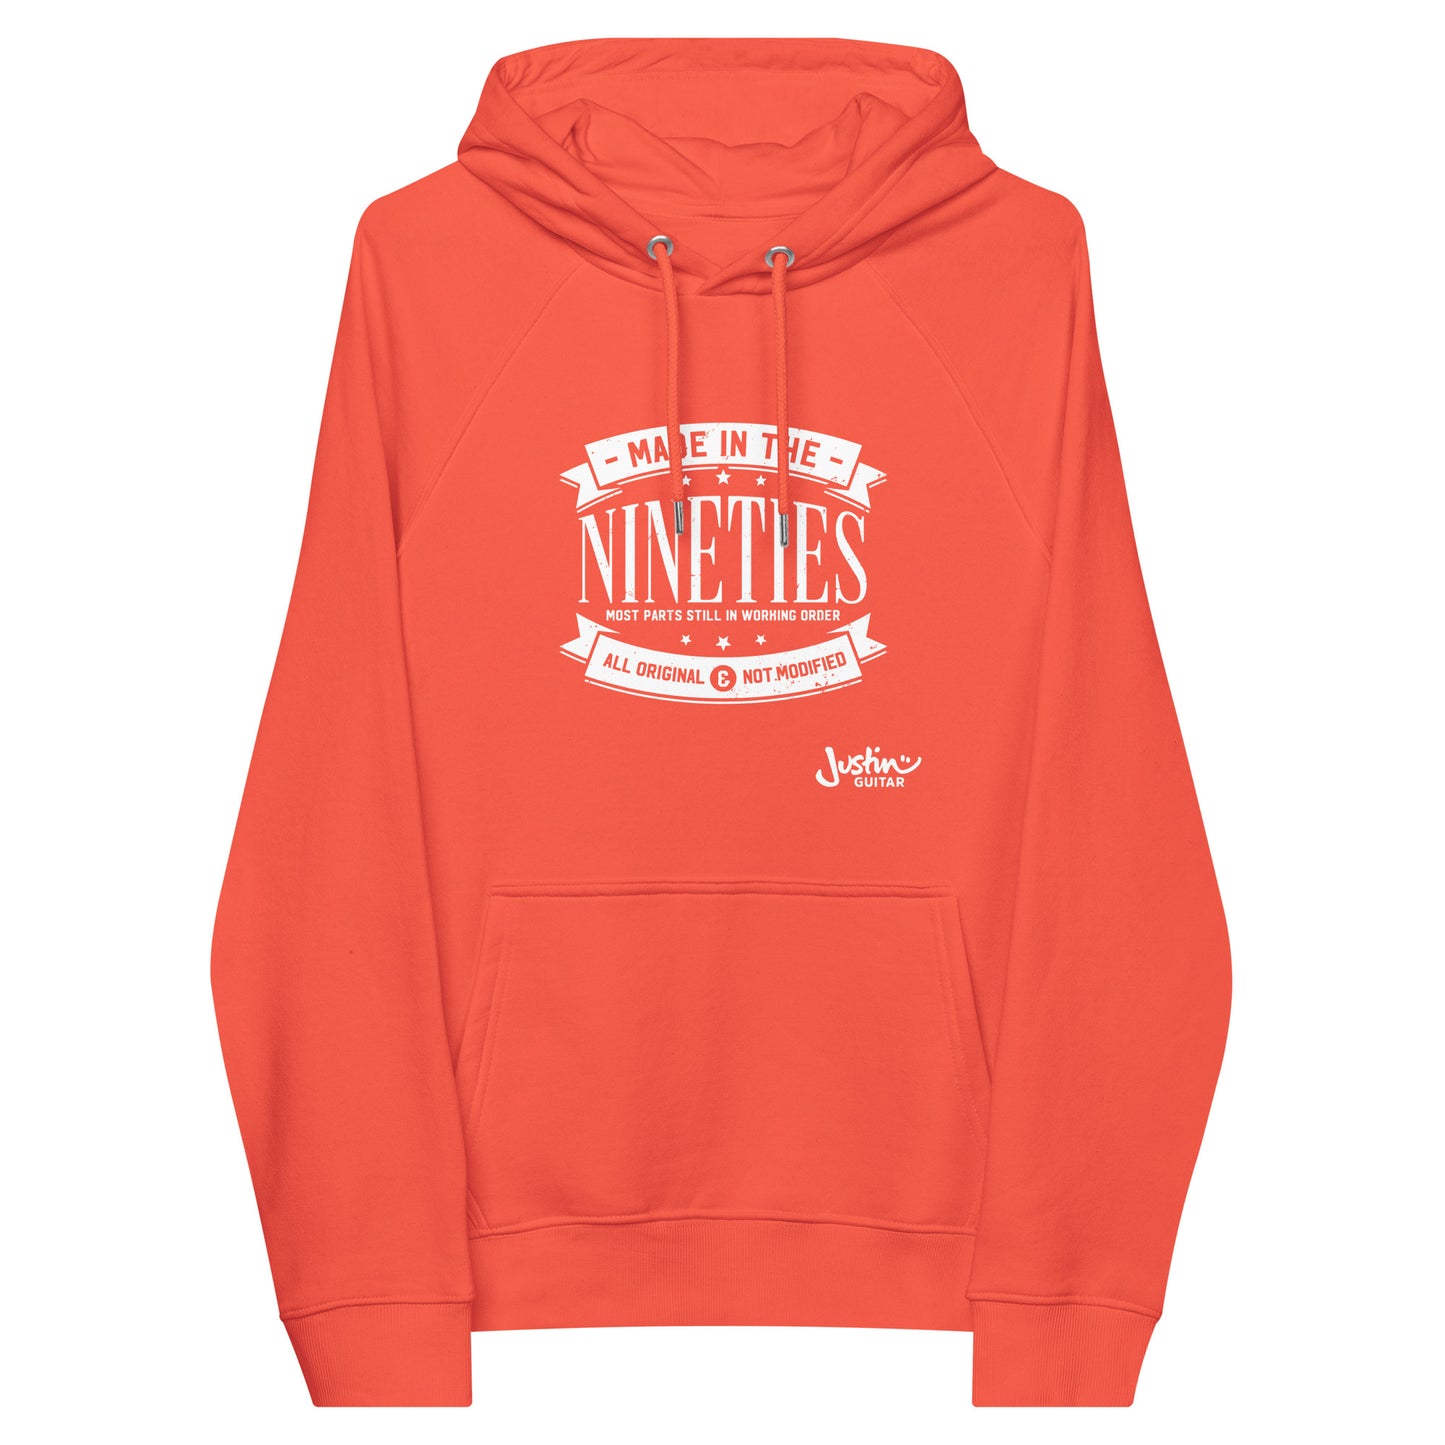 Made In The 90 Guitarist Hoodie